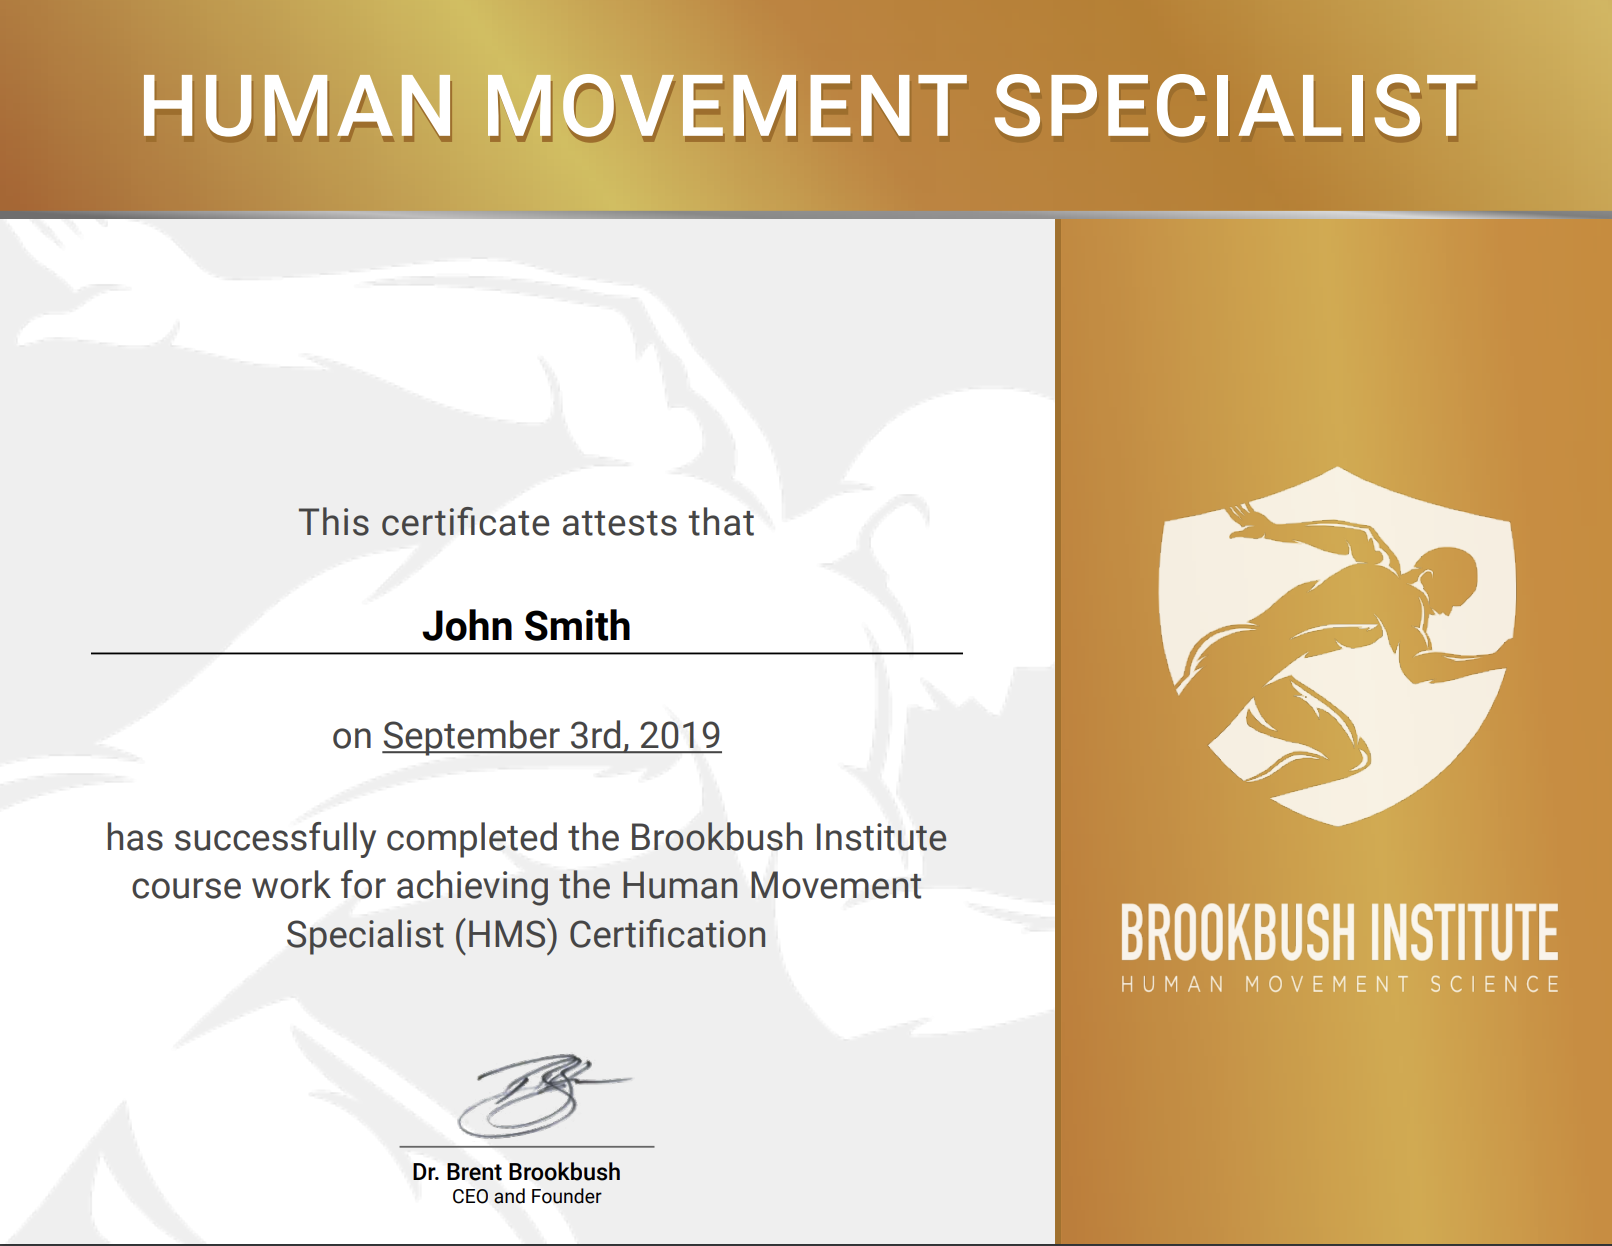 Example of a Human Movement Specialist certification